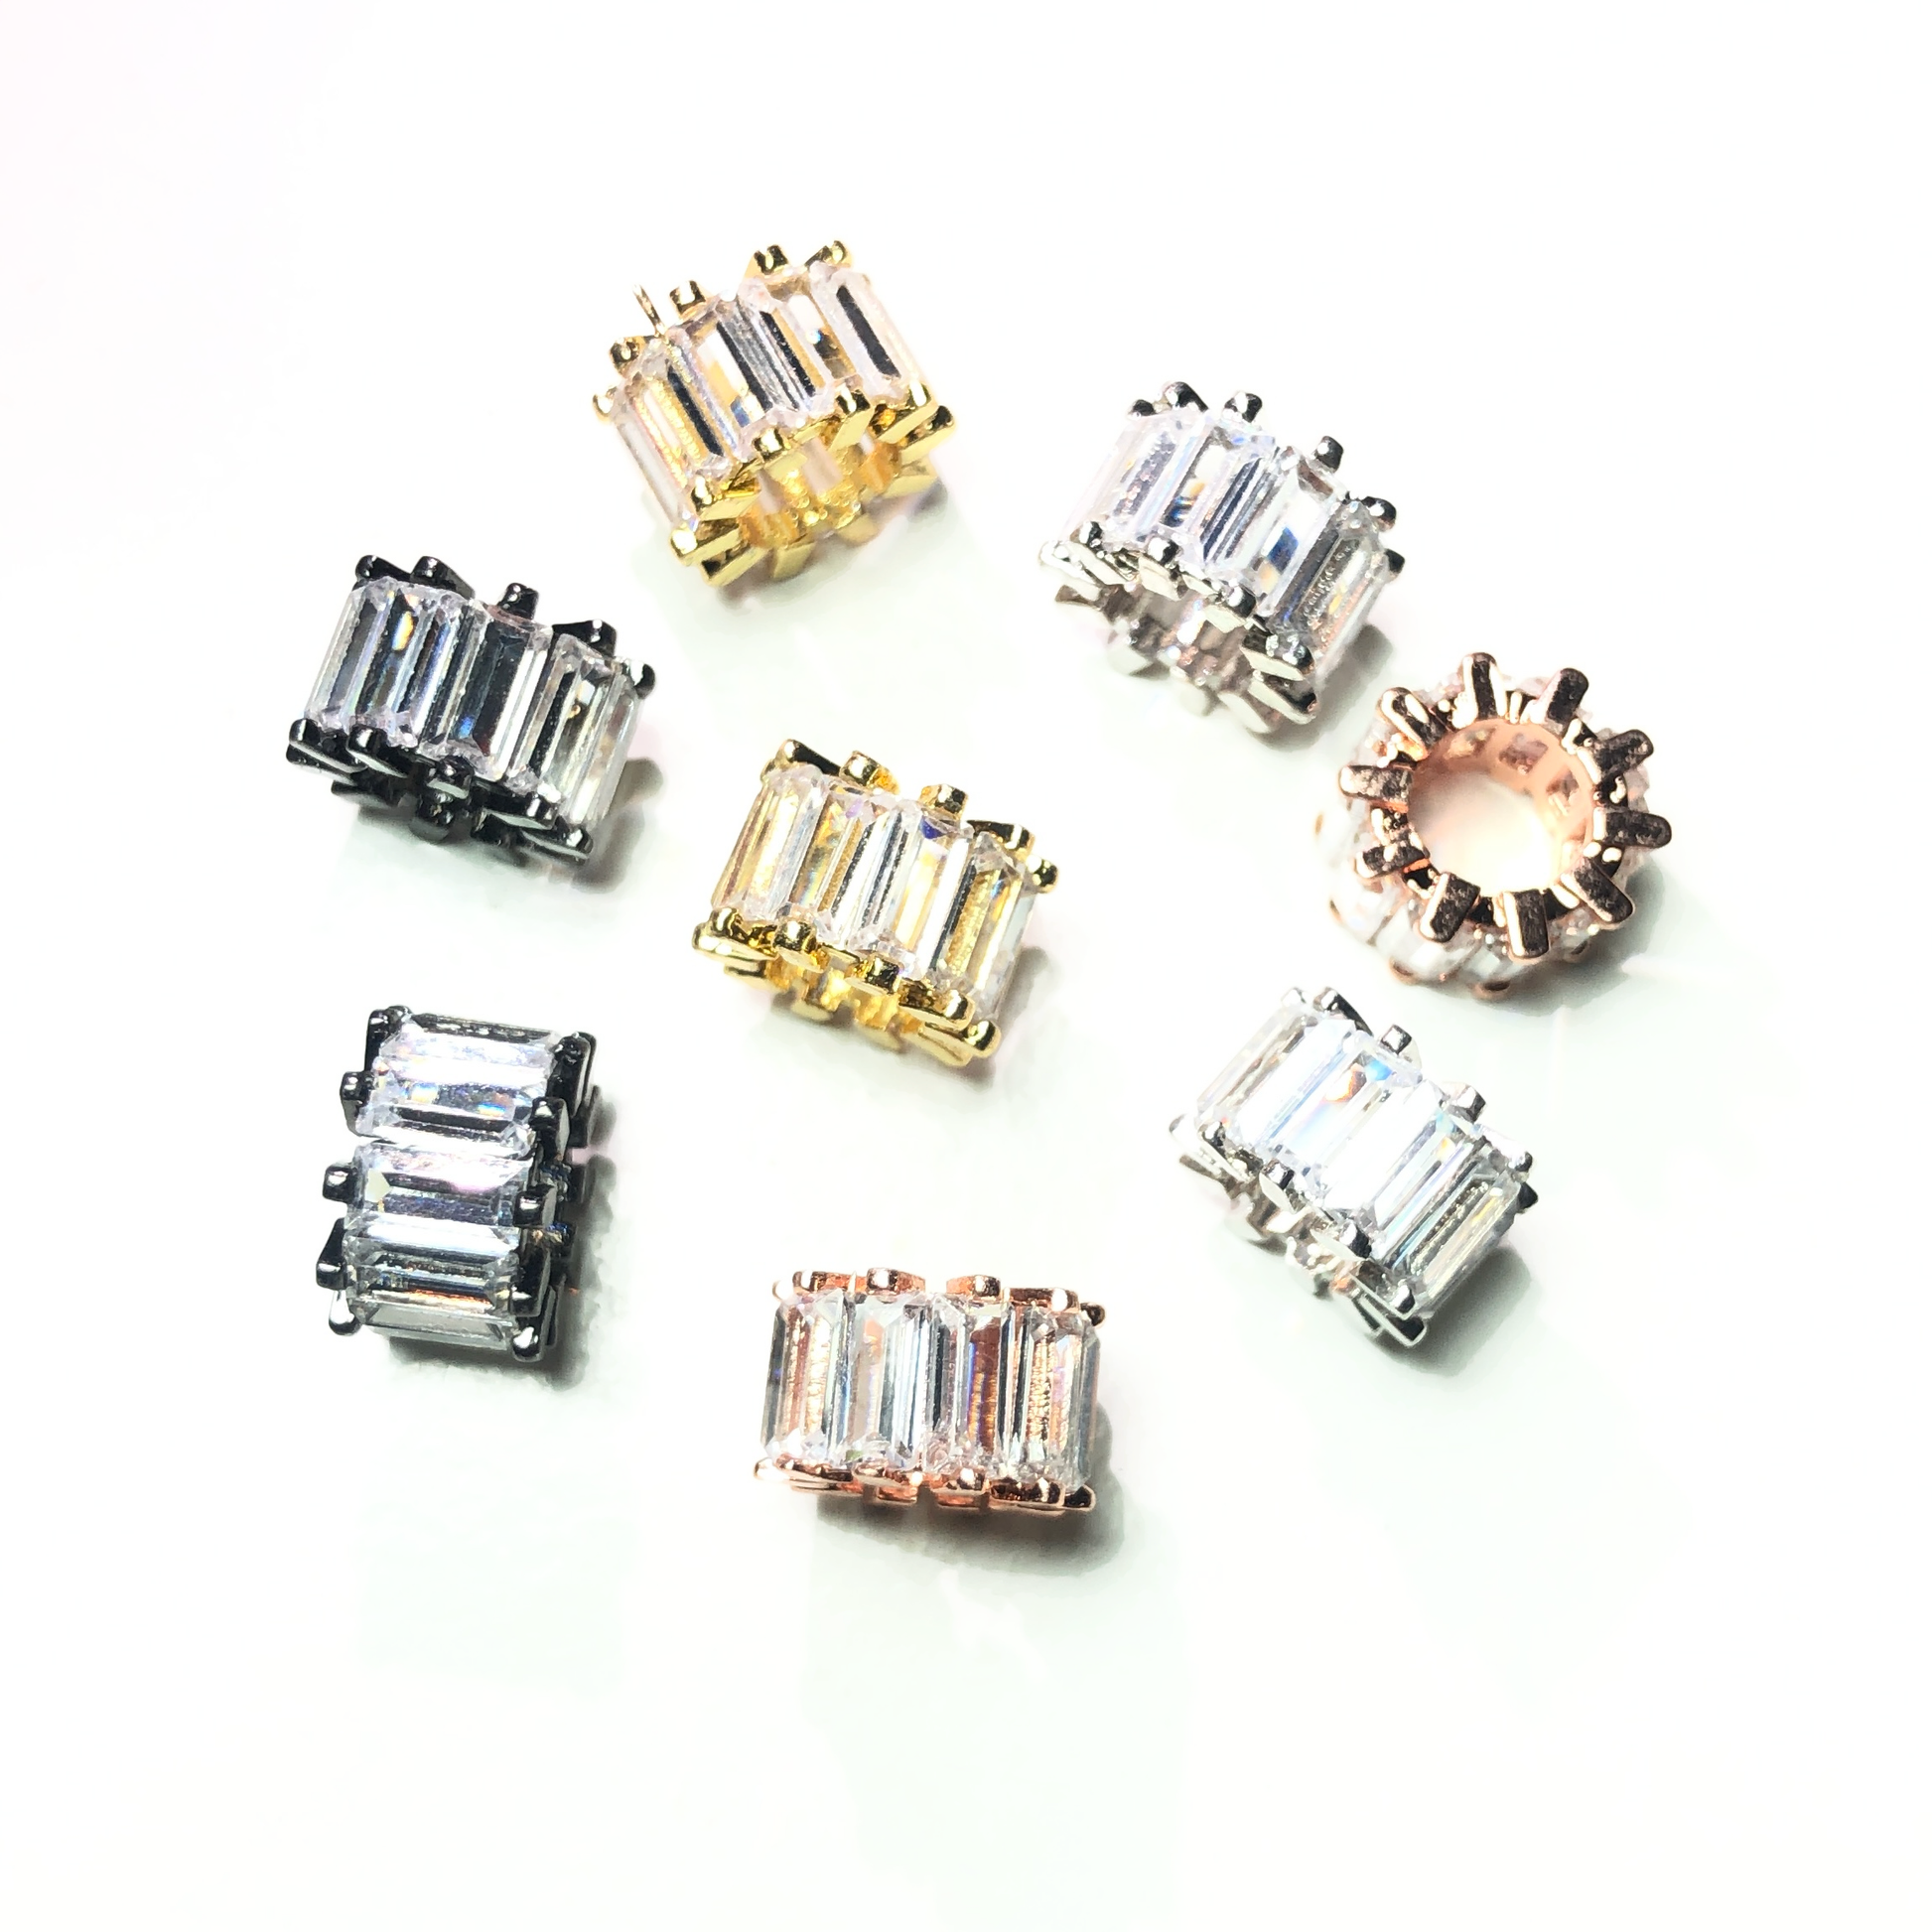 10pcs/lot 9.5*6.4mm Clear CZ Paved Big Hole Spacers Mix Colors CZ Paved Spacers Big Hole Beads New Spacers Arrivals Charms Beads Beyond